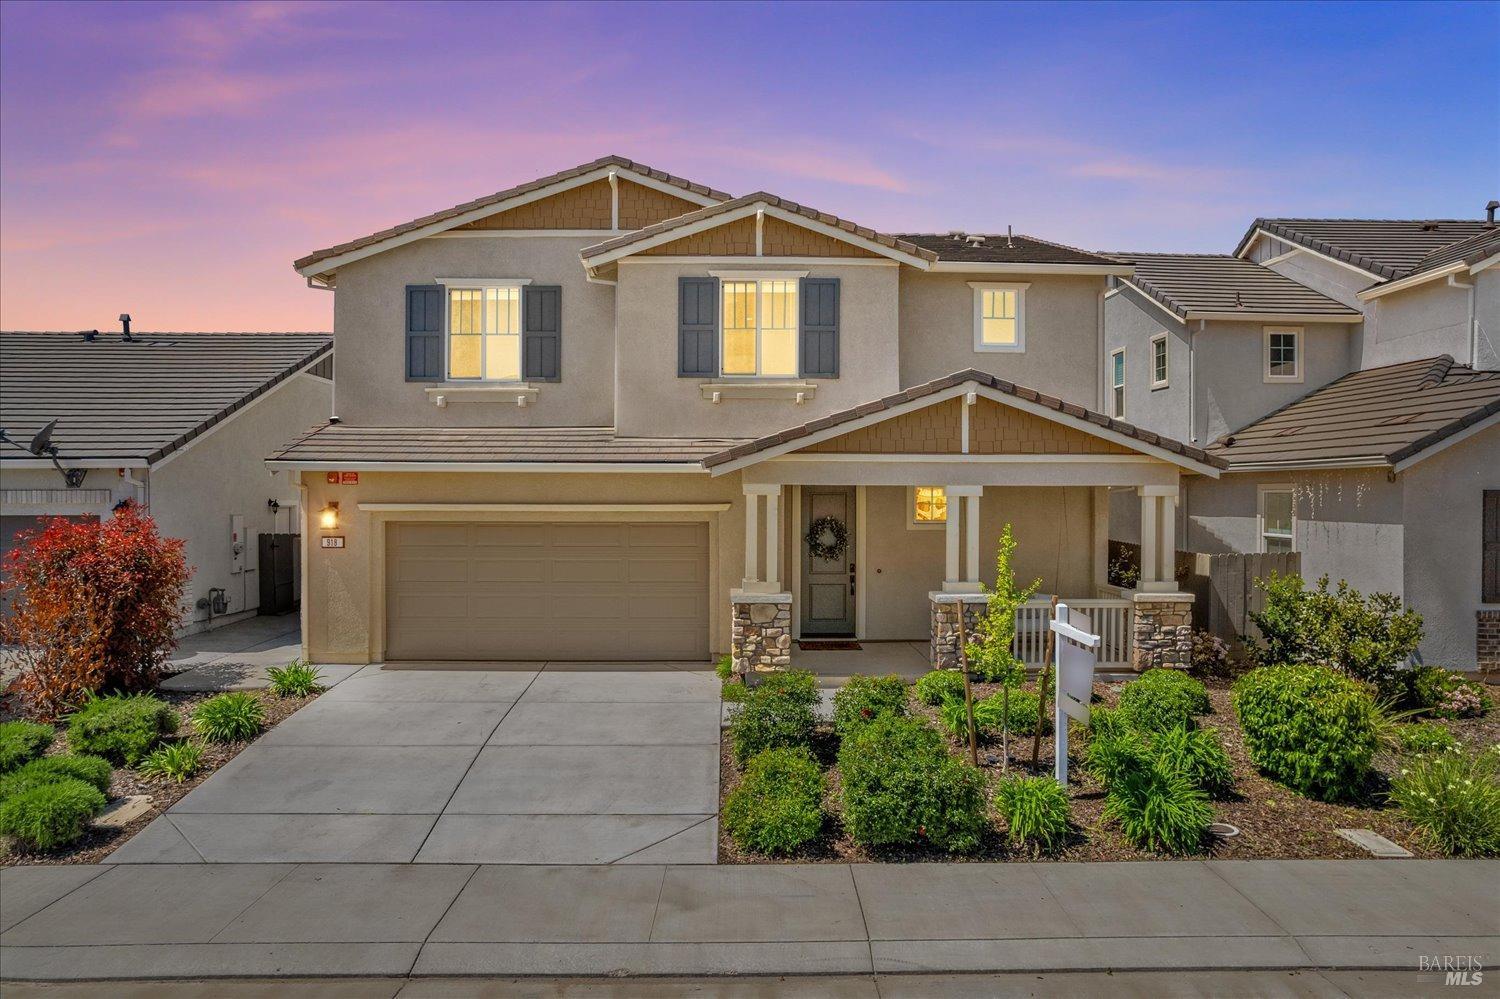 Step into modern elegance with this stunning 2020-built Vacaville home that boasts owned solar and n